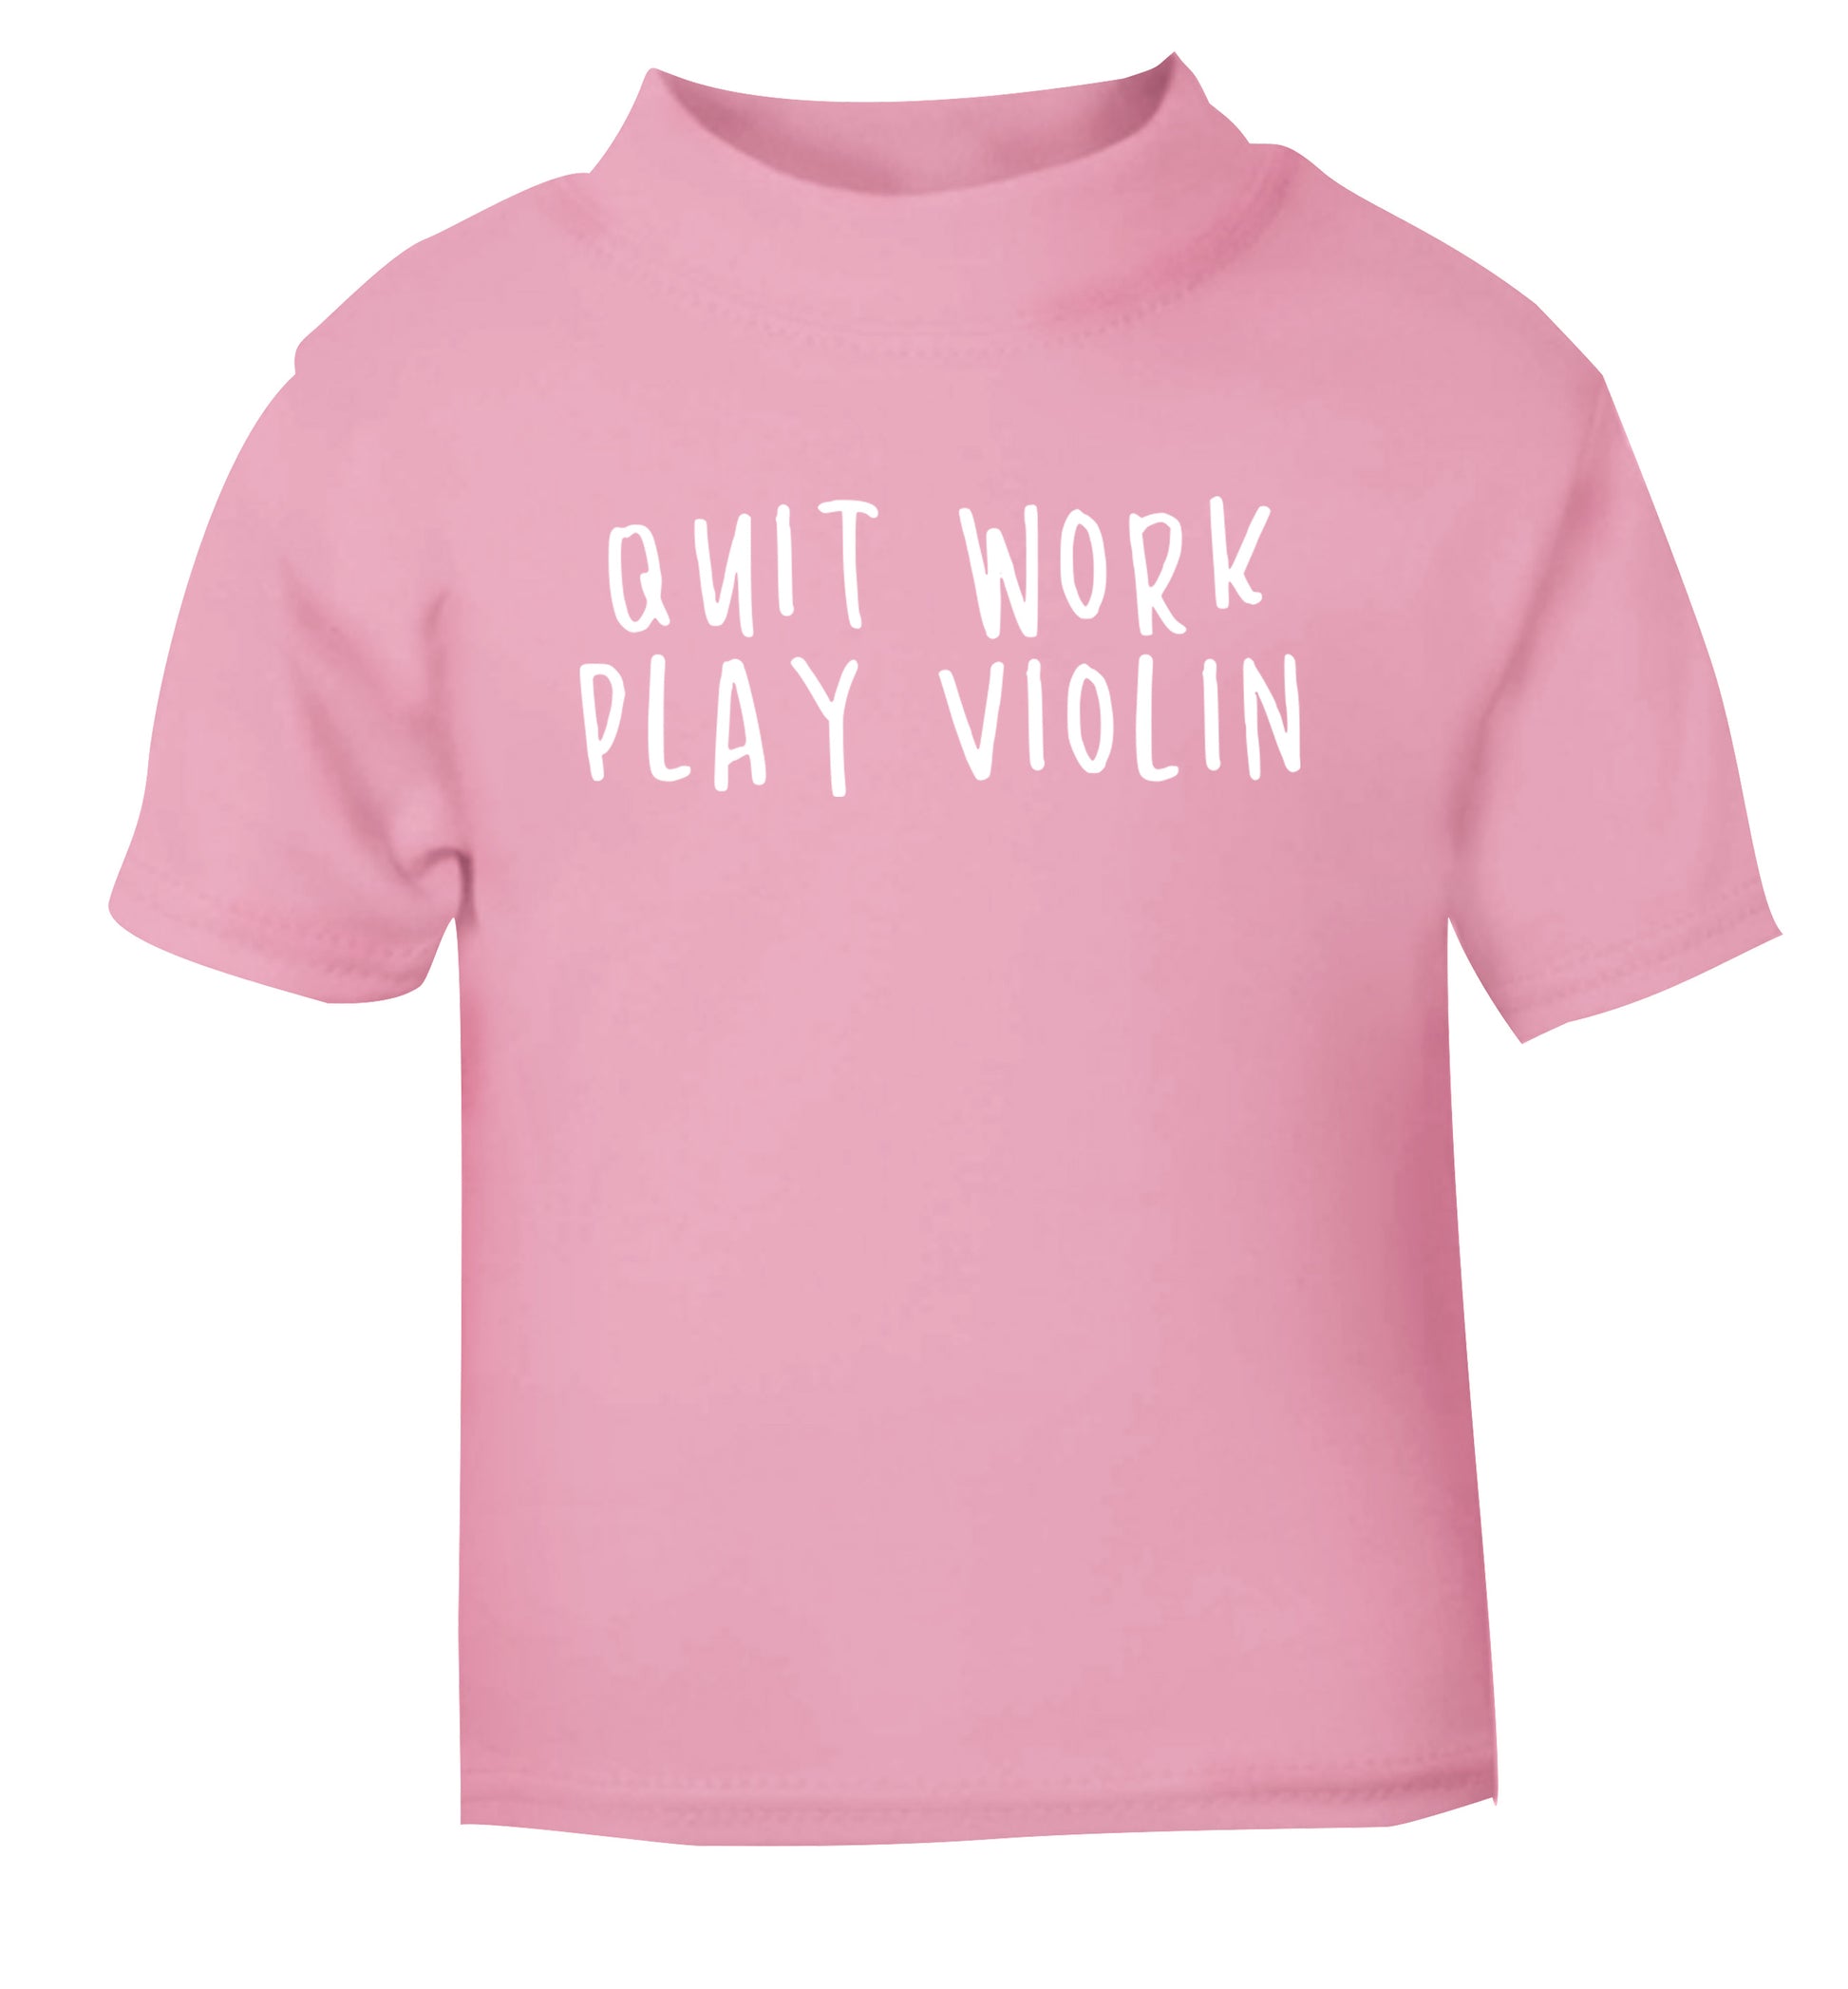 Quit work play violin light pink Baby Toddler Tshirt 2 Years